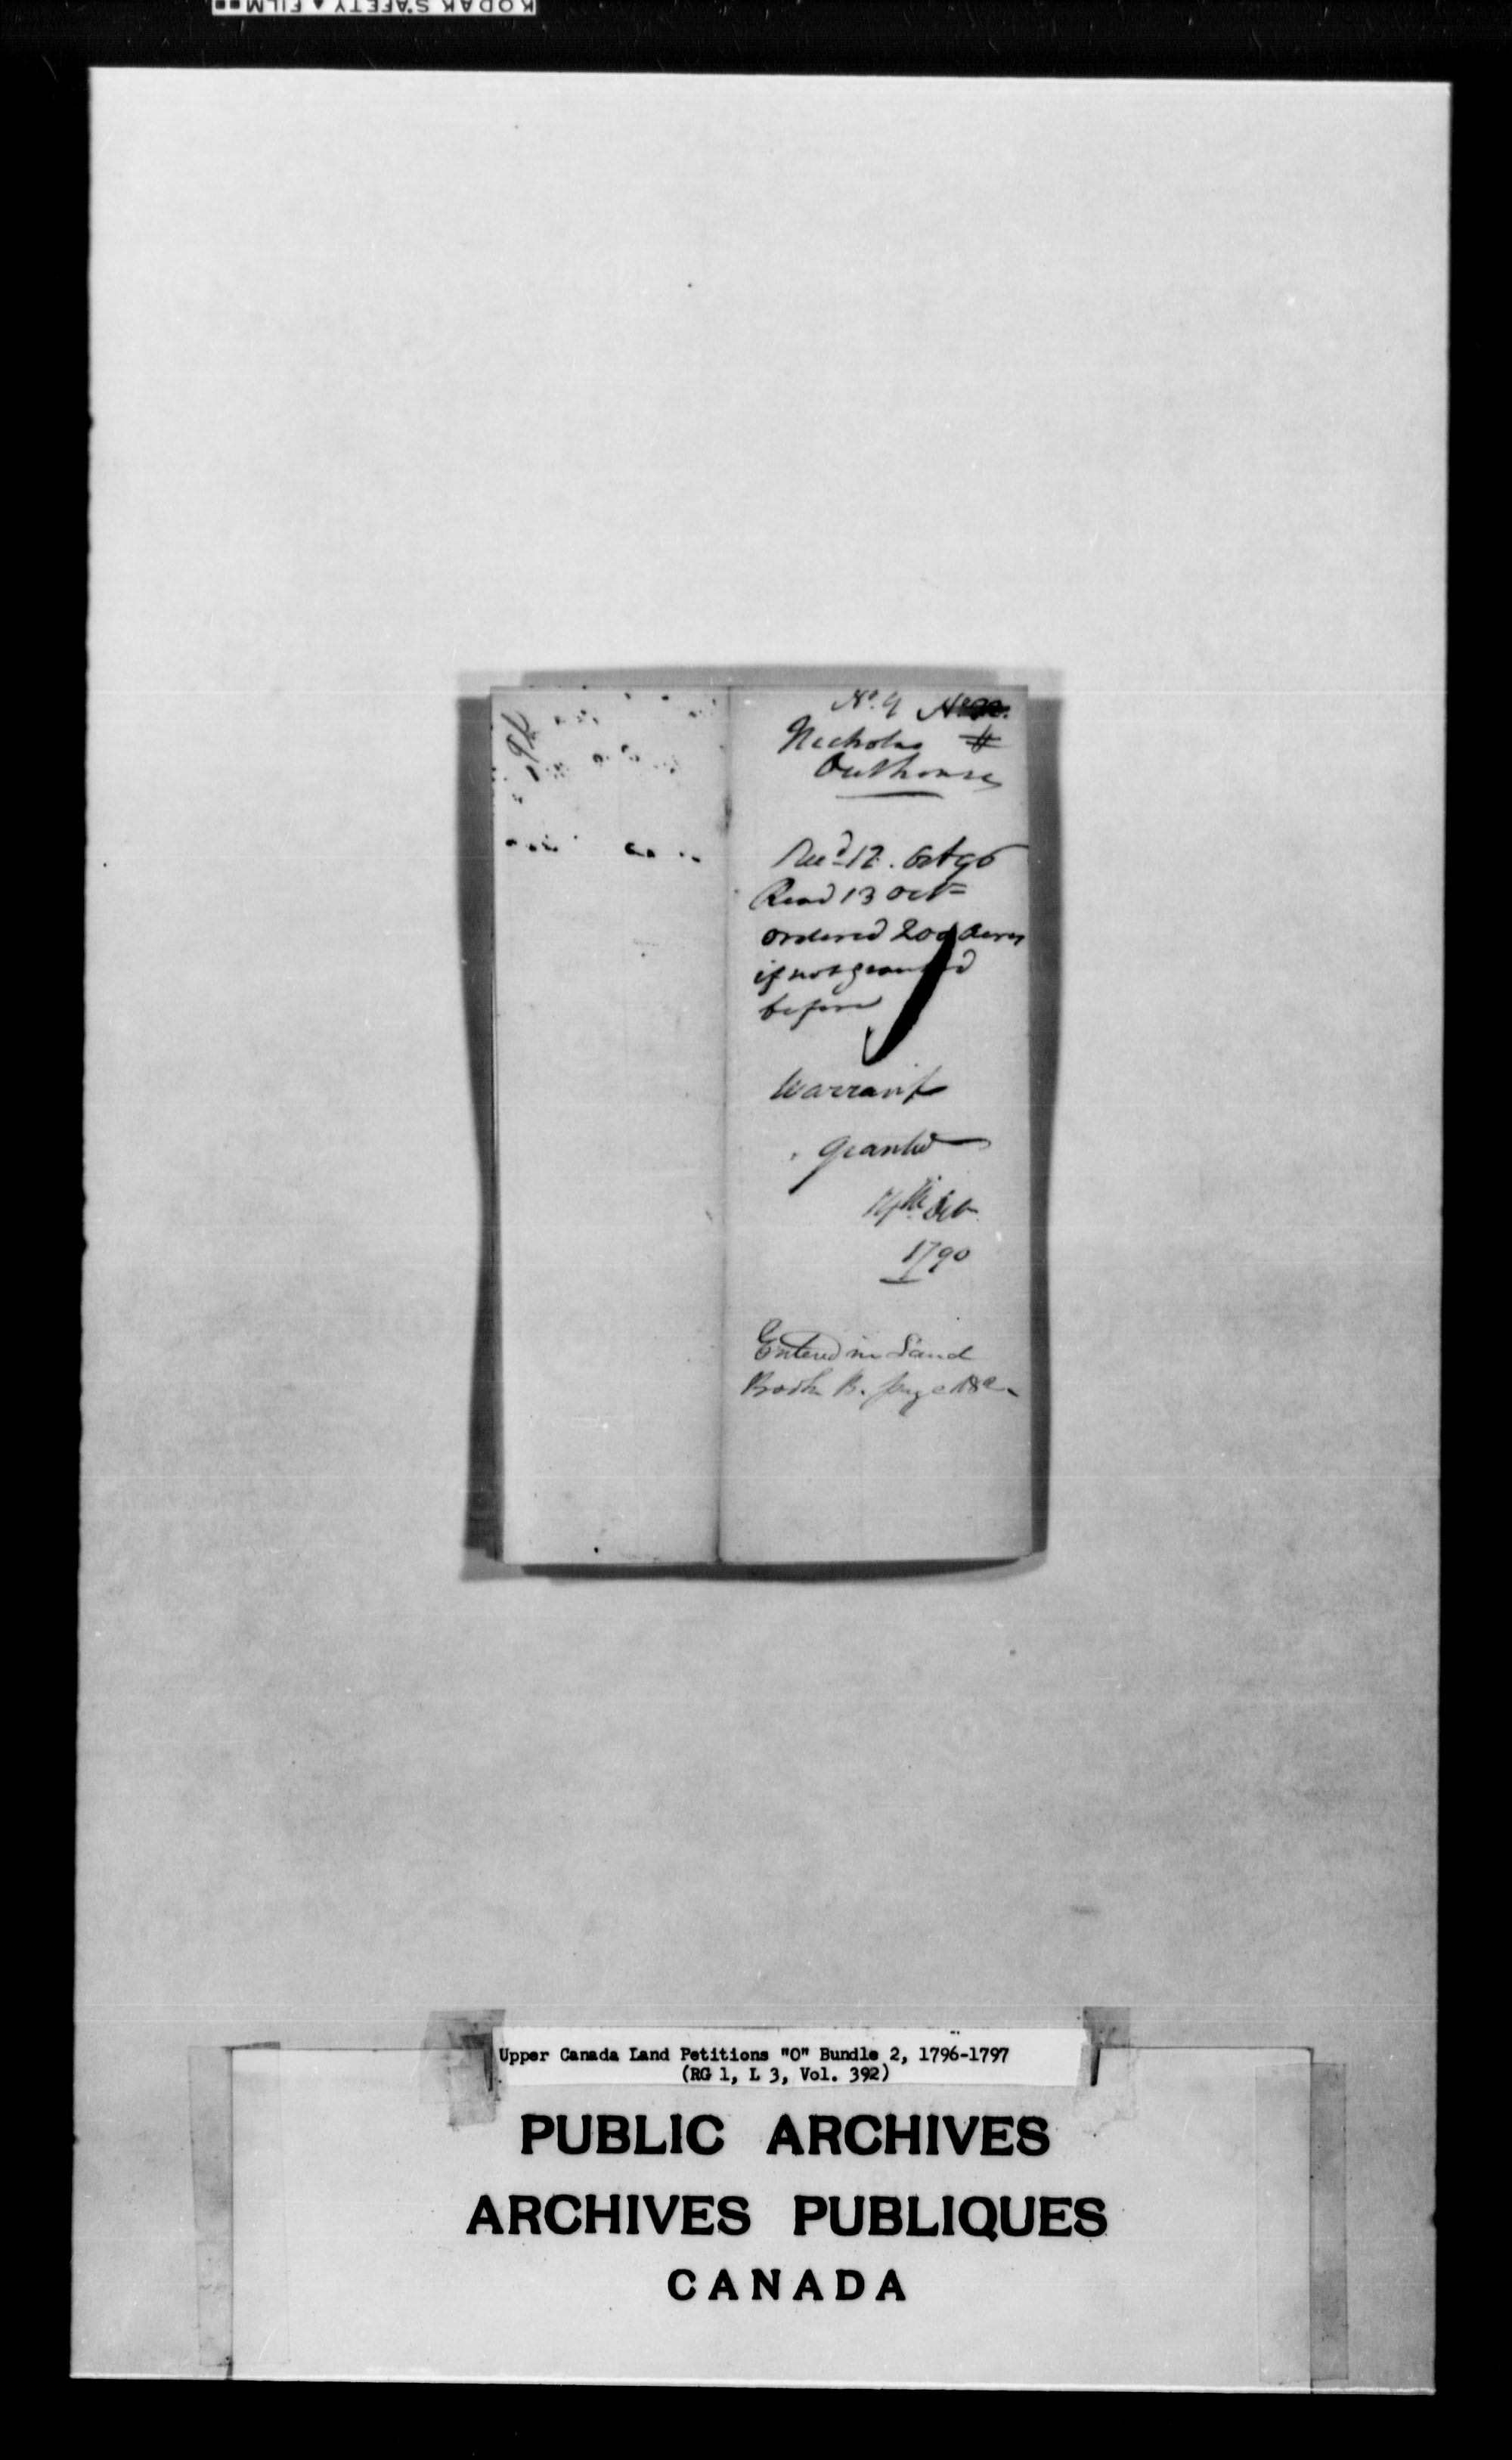 Title: Upper Canada Land Petitions (1763-1865) - Mikan Number: 205131 - Microform: c-2484